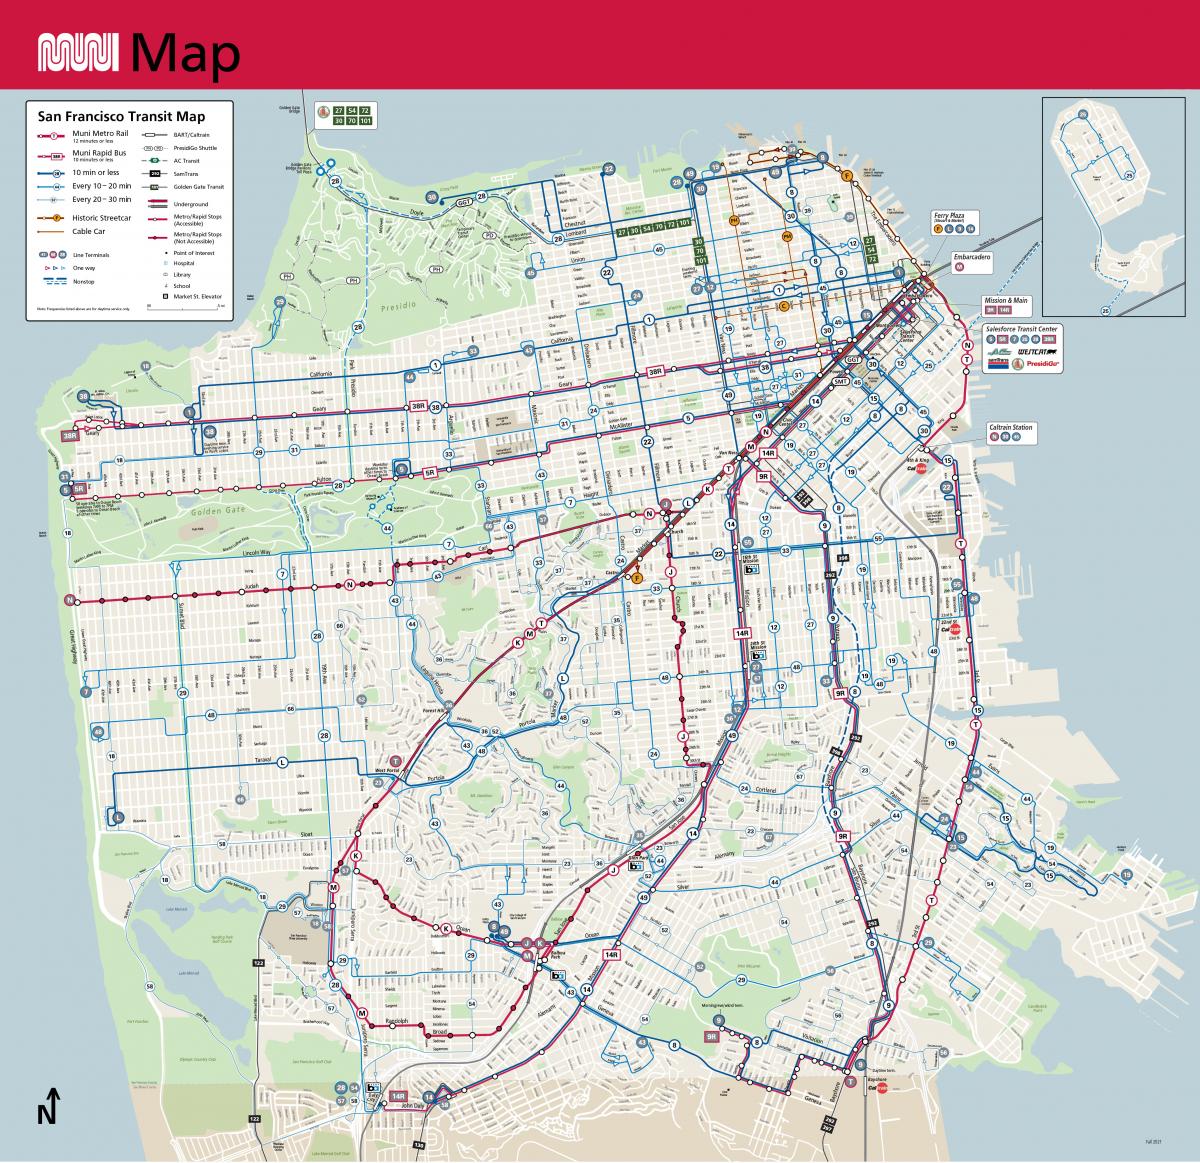 Map showing all of the different transit options in San Francisco, including Muni, BART/Caltrain, AC Transit, PresidiGo and Golden Gate Transit. Map also show's all of Muni's routes and their frequencies.